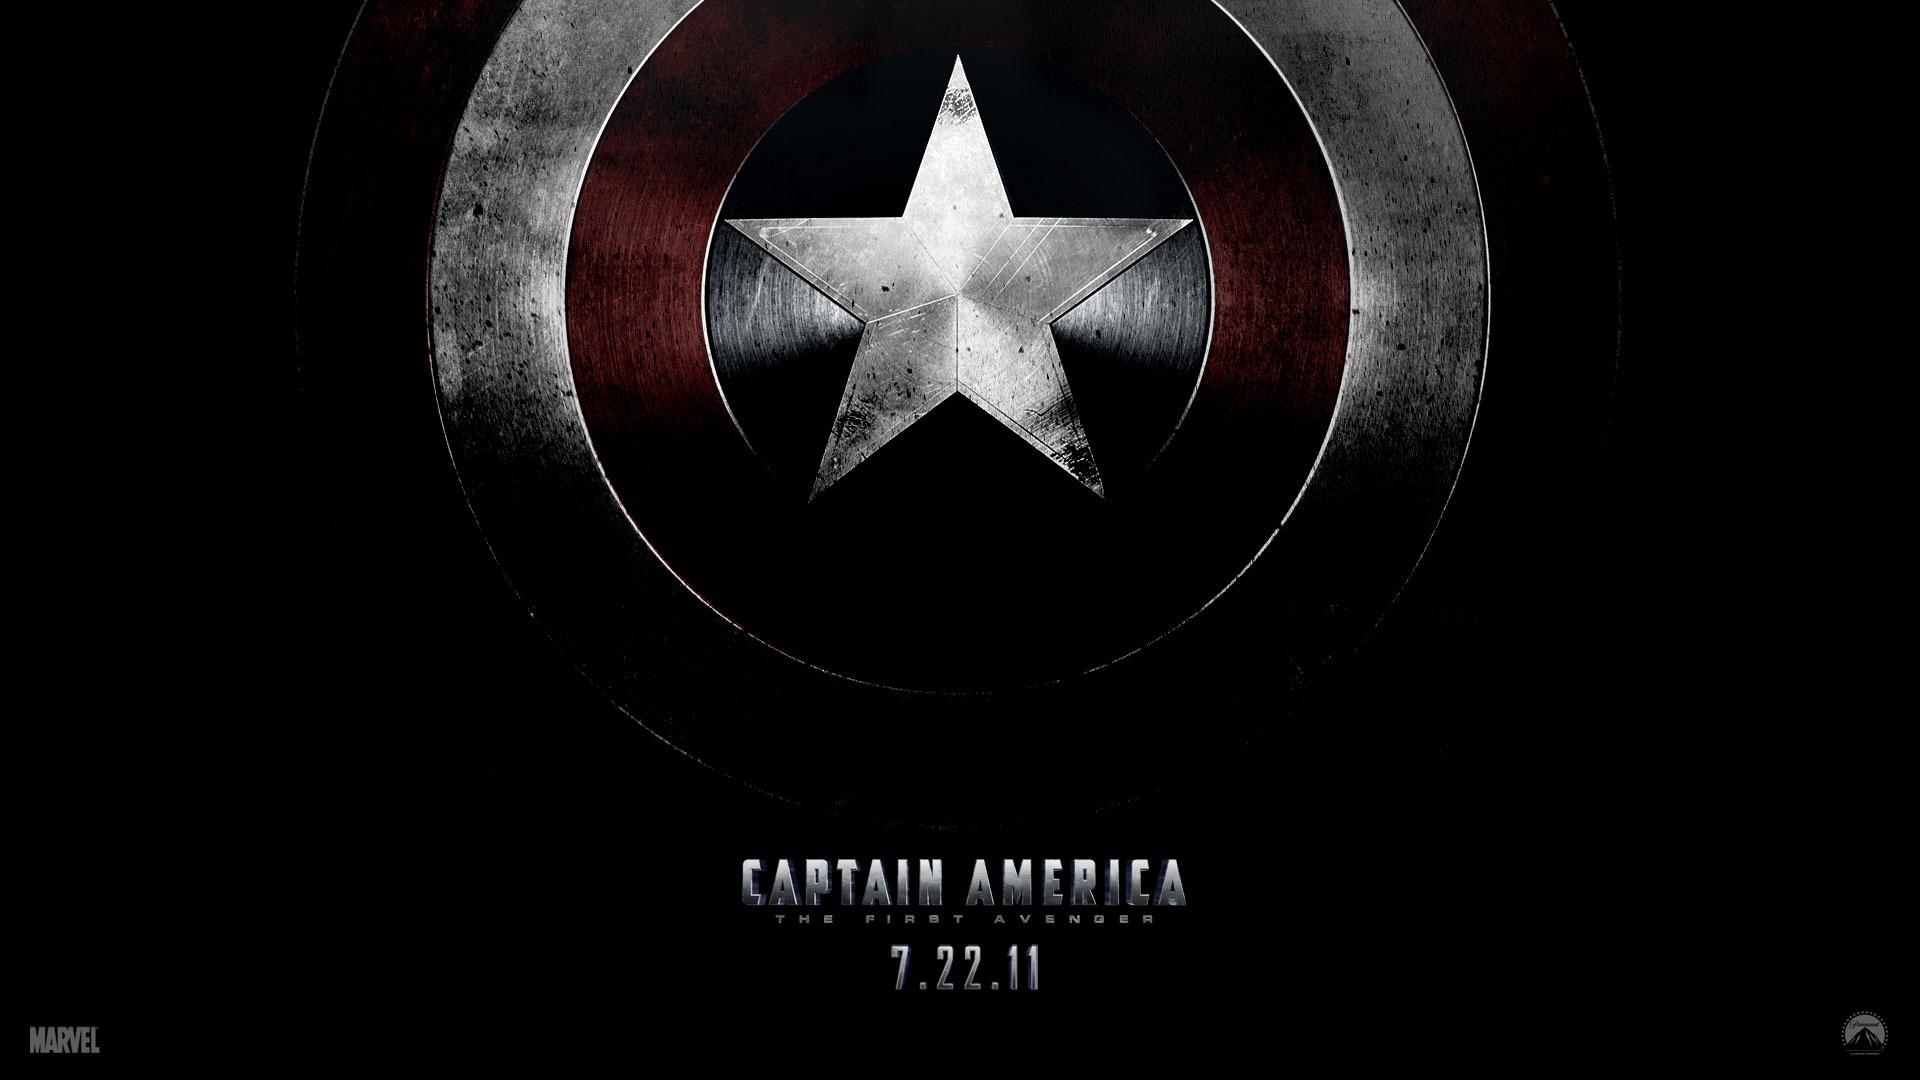 Captain America: The First Avenger wallpapers HD #10 - 1920x1080